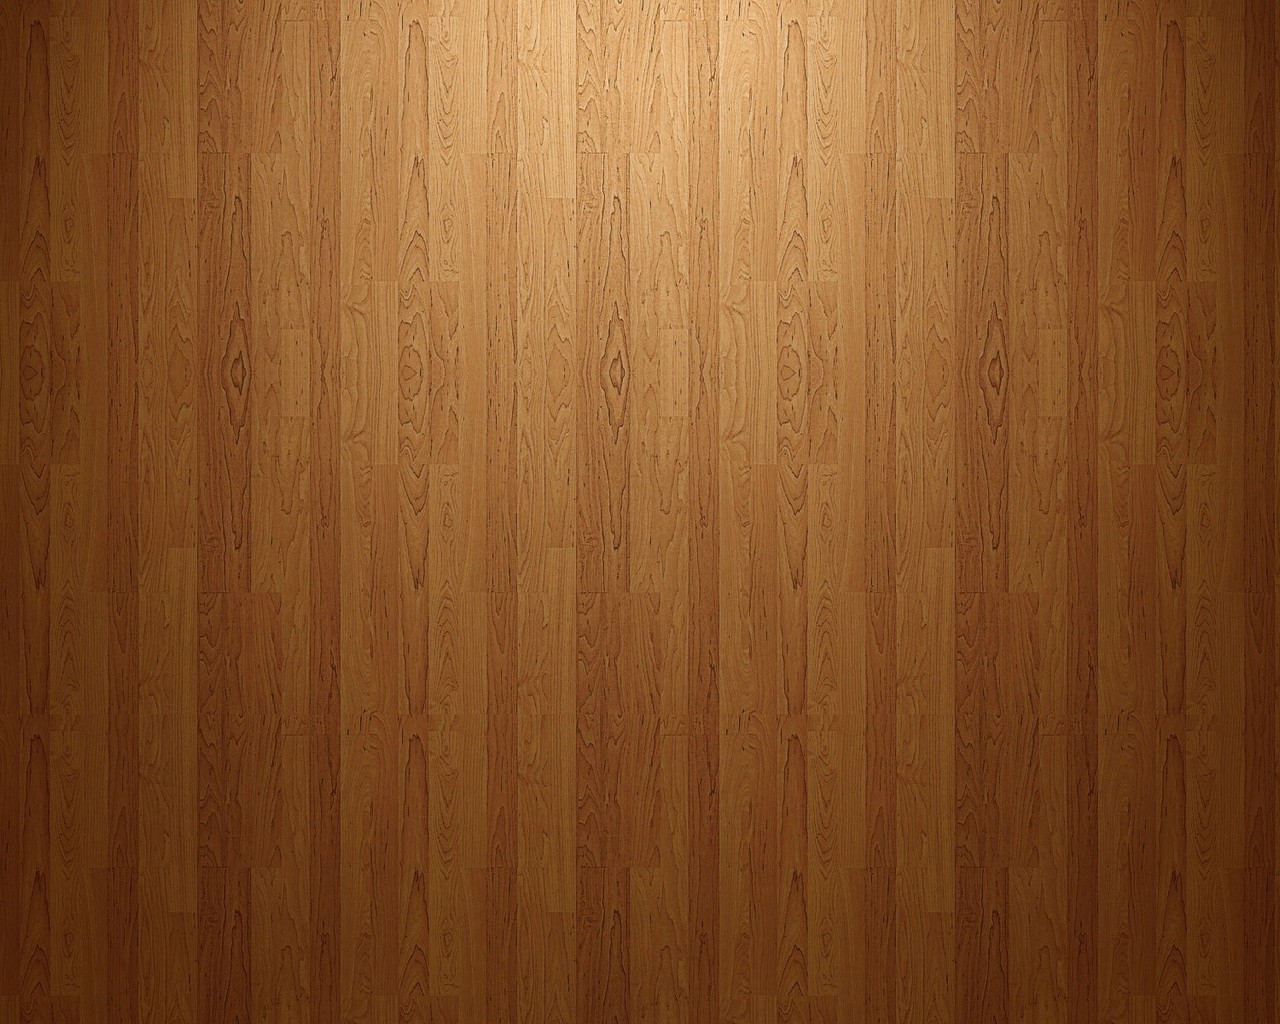 Wooden-background - Background Wood , HD Wallpaper & Backgrounds